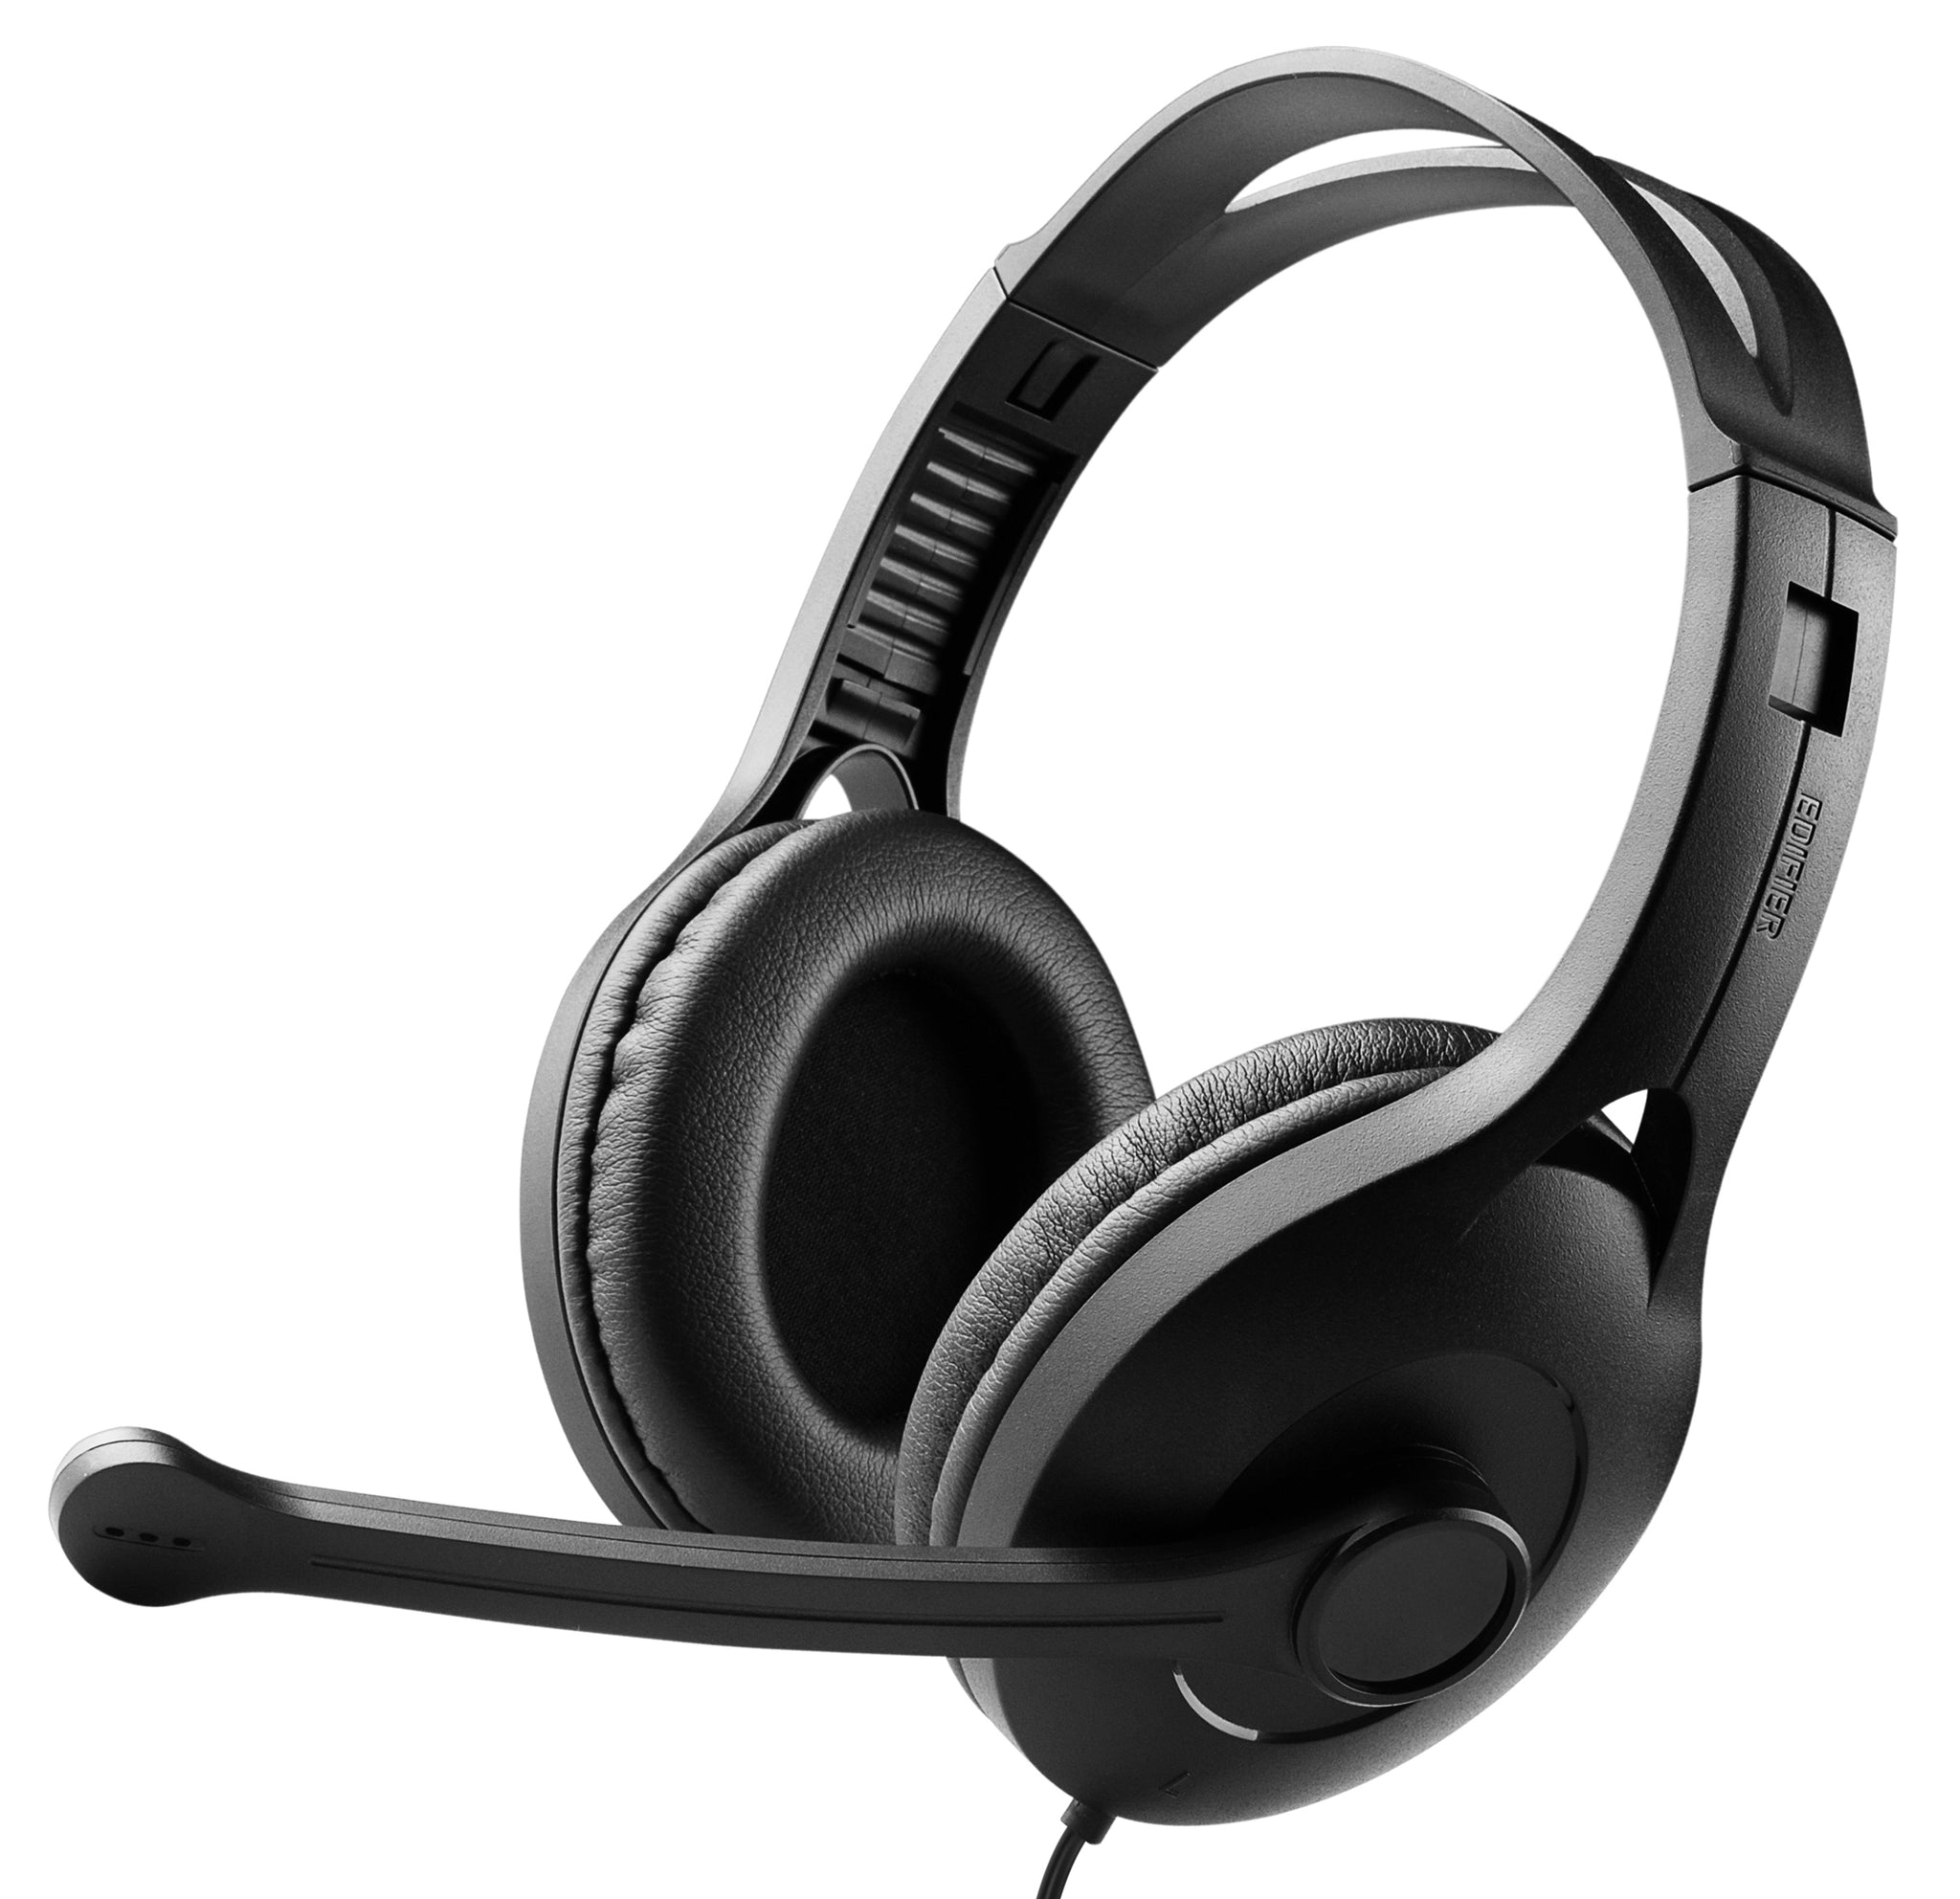 Edifier K800 High Performance USB PC / Laptop / Computer Headset With Microphone - Black